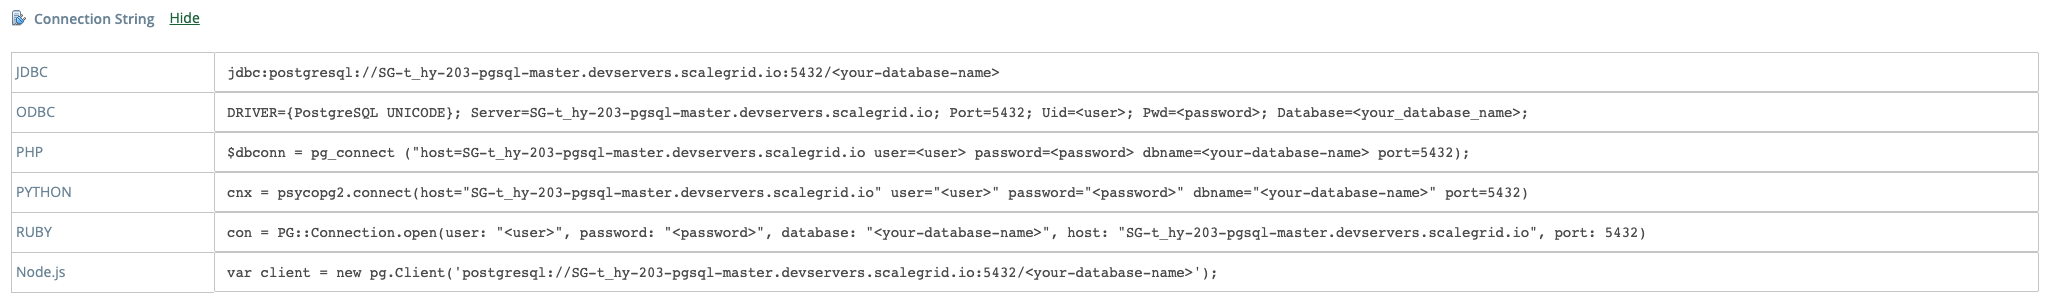 Find your Connection String on your PostgreSQL Cluster Details page under your Credentials.